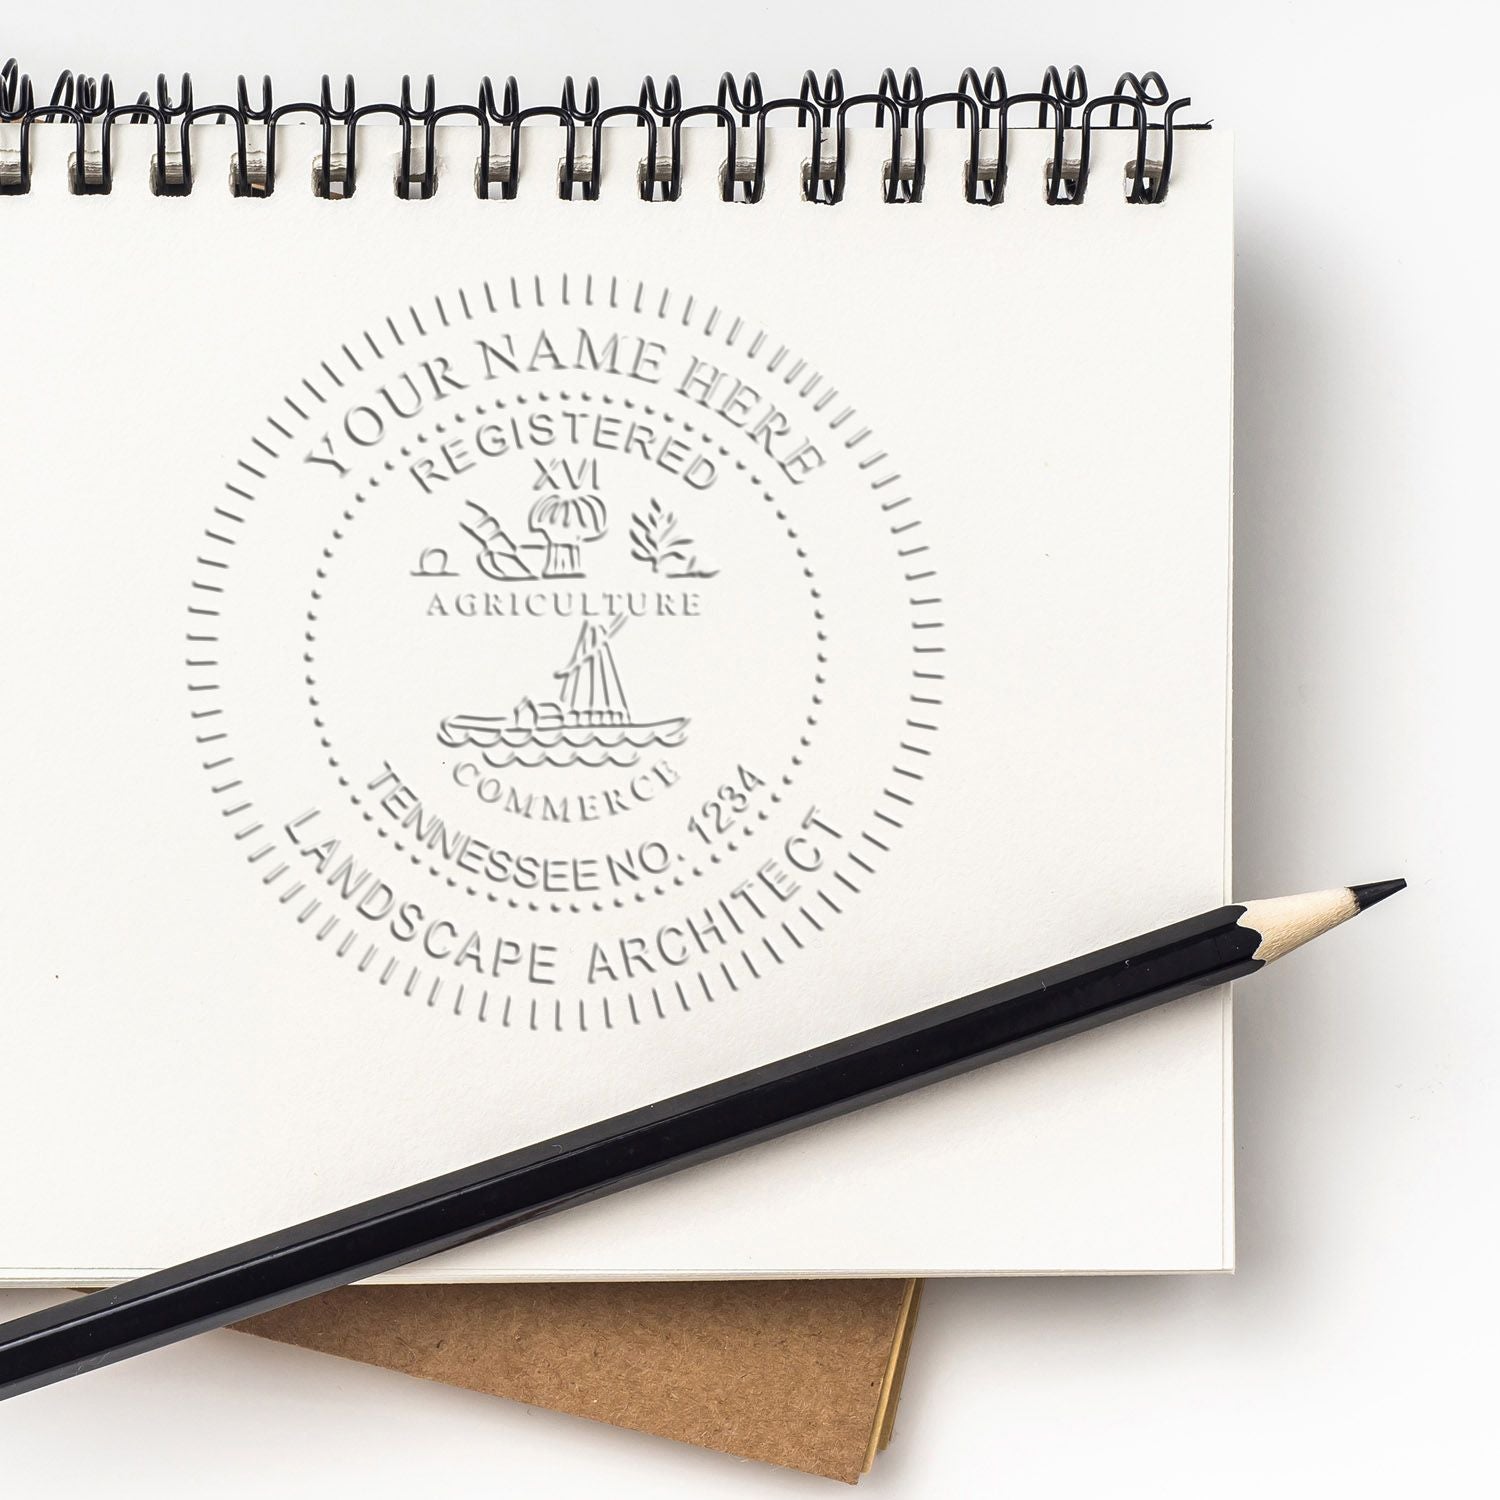 A photograph of the State of Tennessee Extended Long Reach Landscape Architect Seal Embosser stamp impression reveals a vivid, professional image of the on paper.